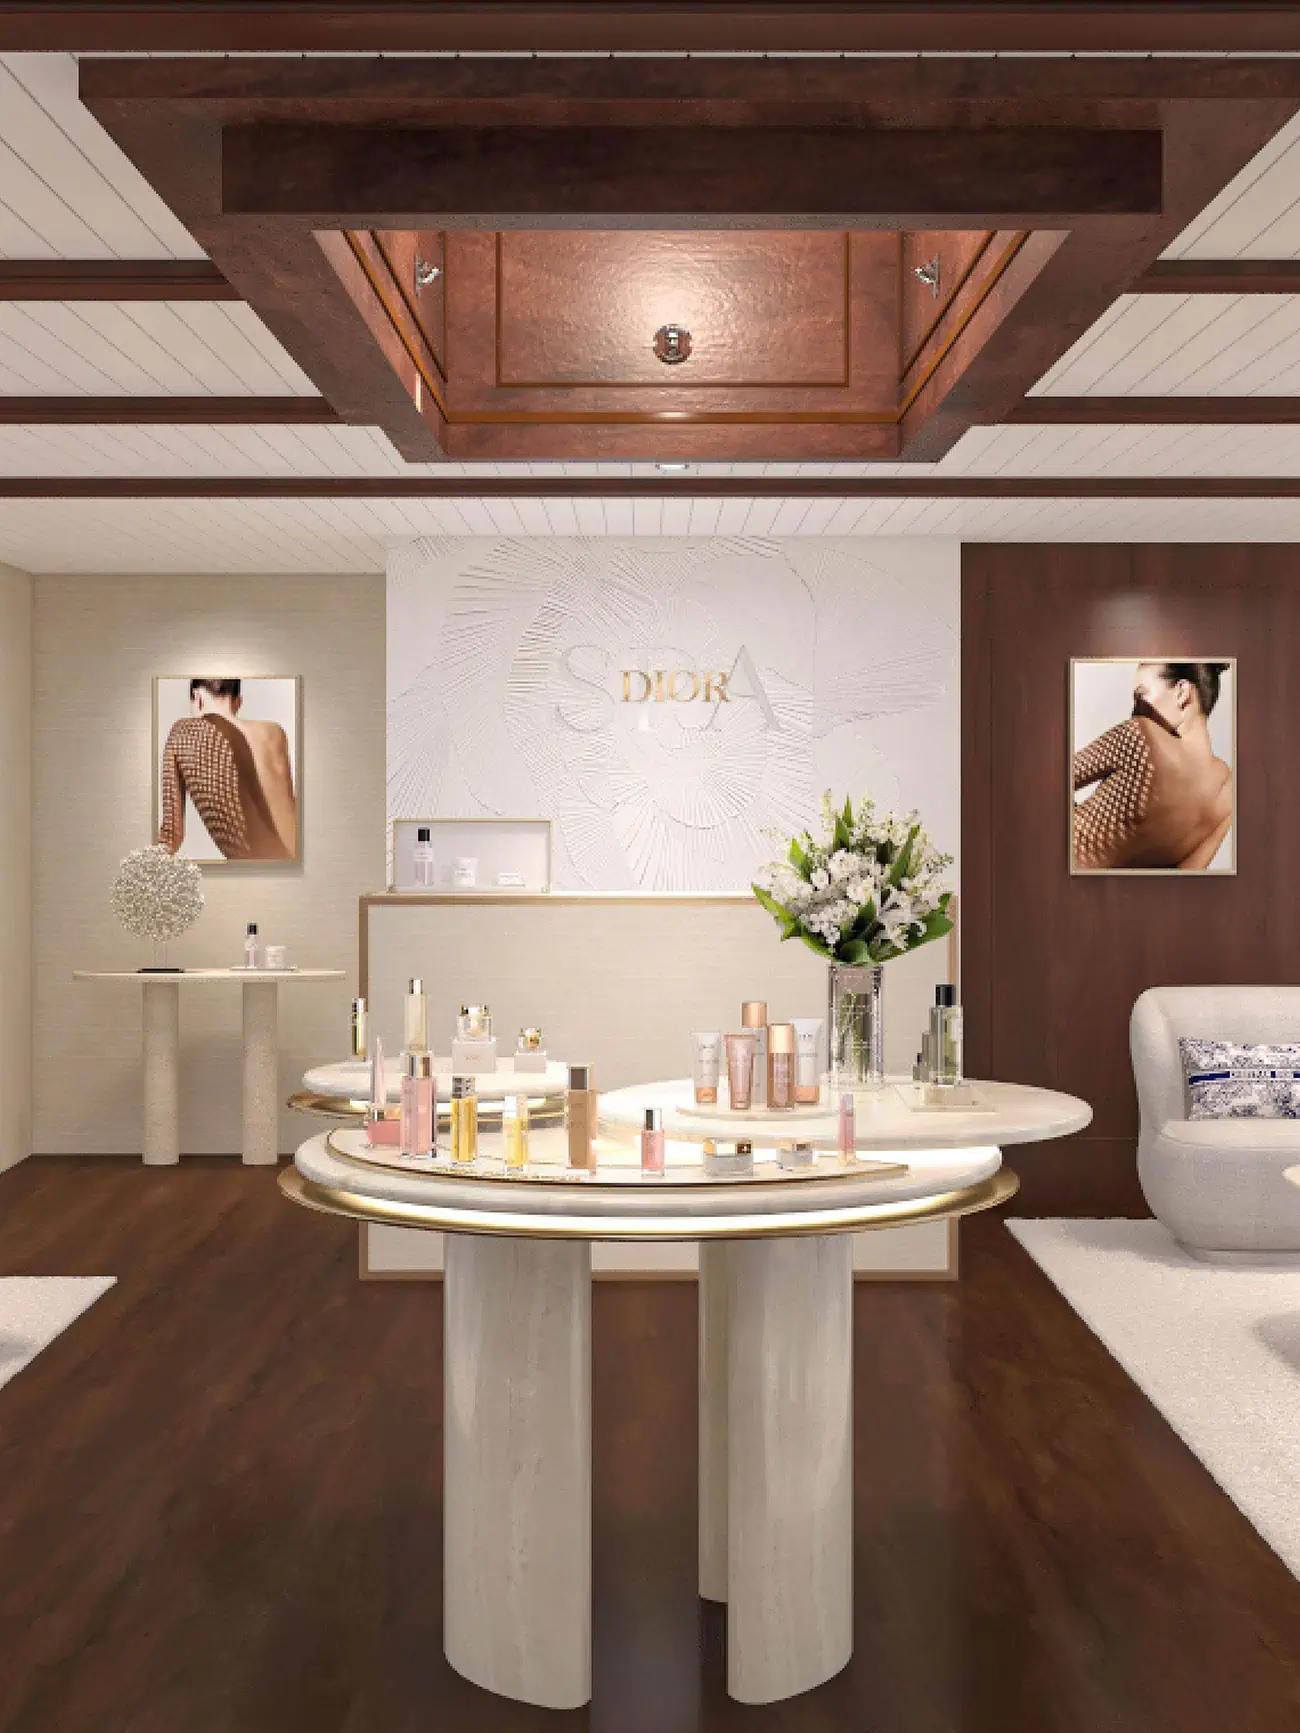 The return of Dior Spa Cruise experience